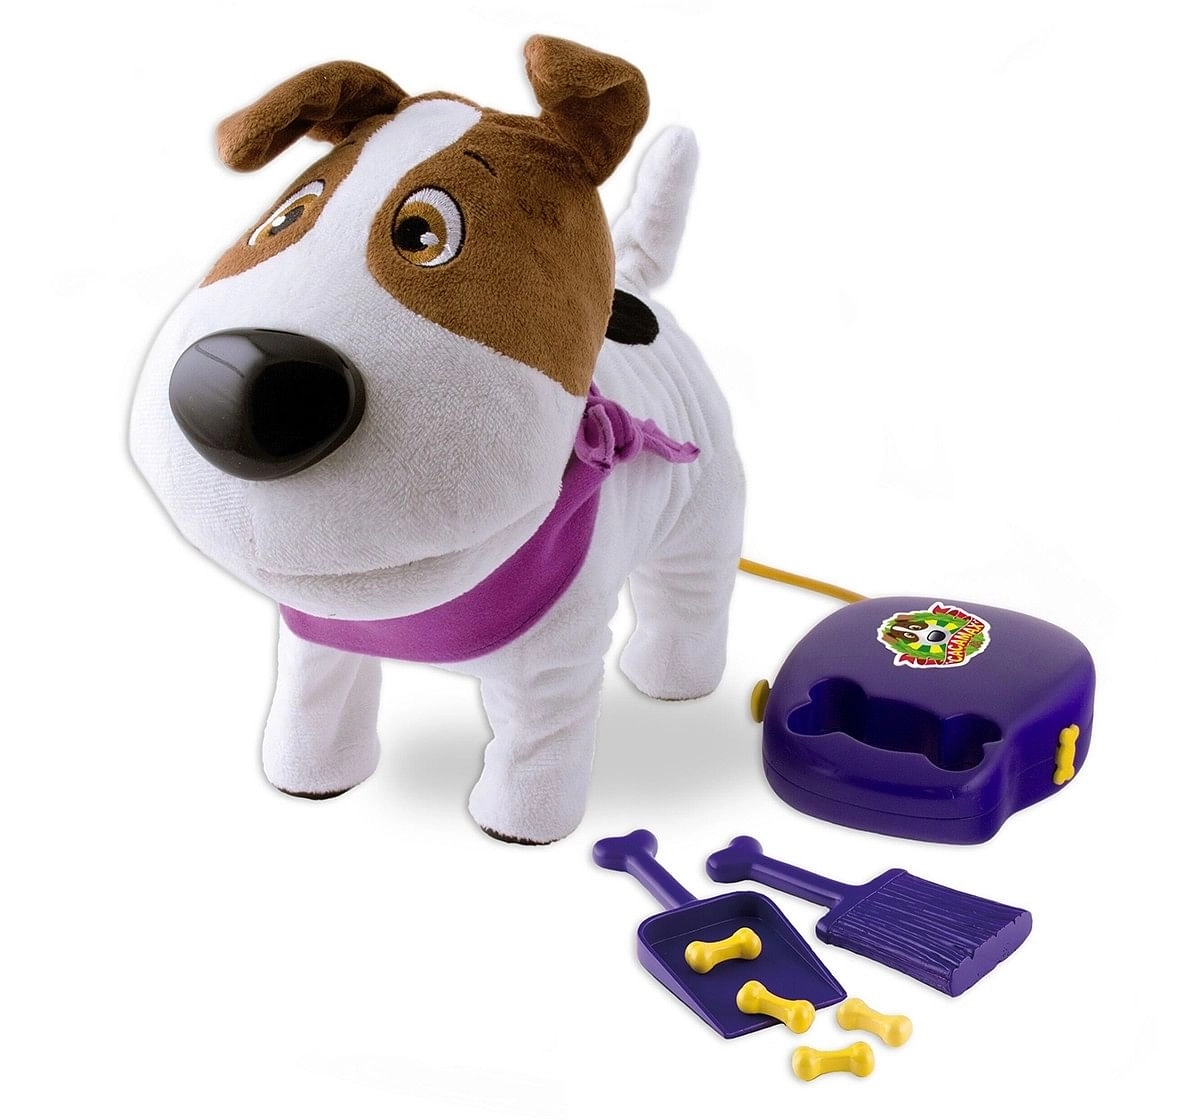 Imc Popomax "The Naughtiest Puppy" Interactive Soft Toys for Kids age 3Y+ - 24 Cm 